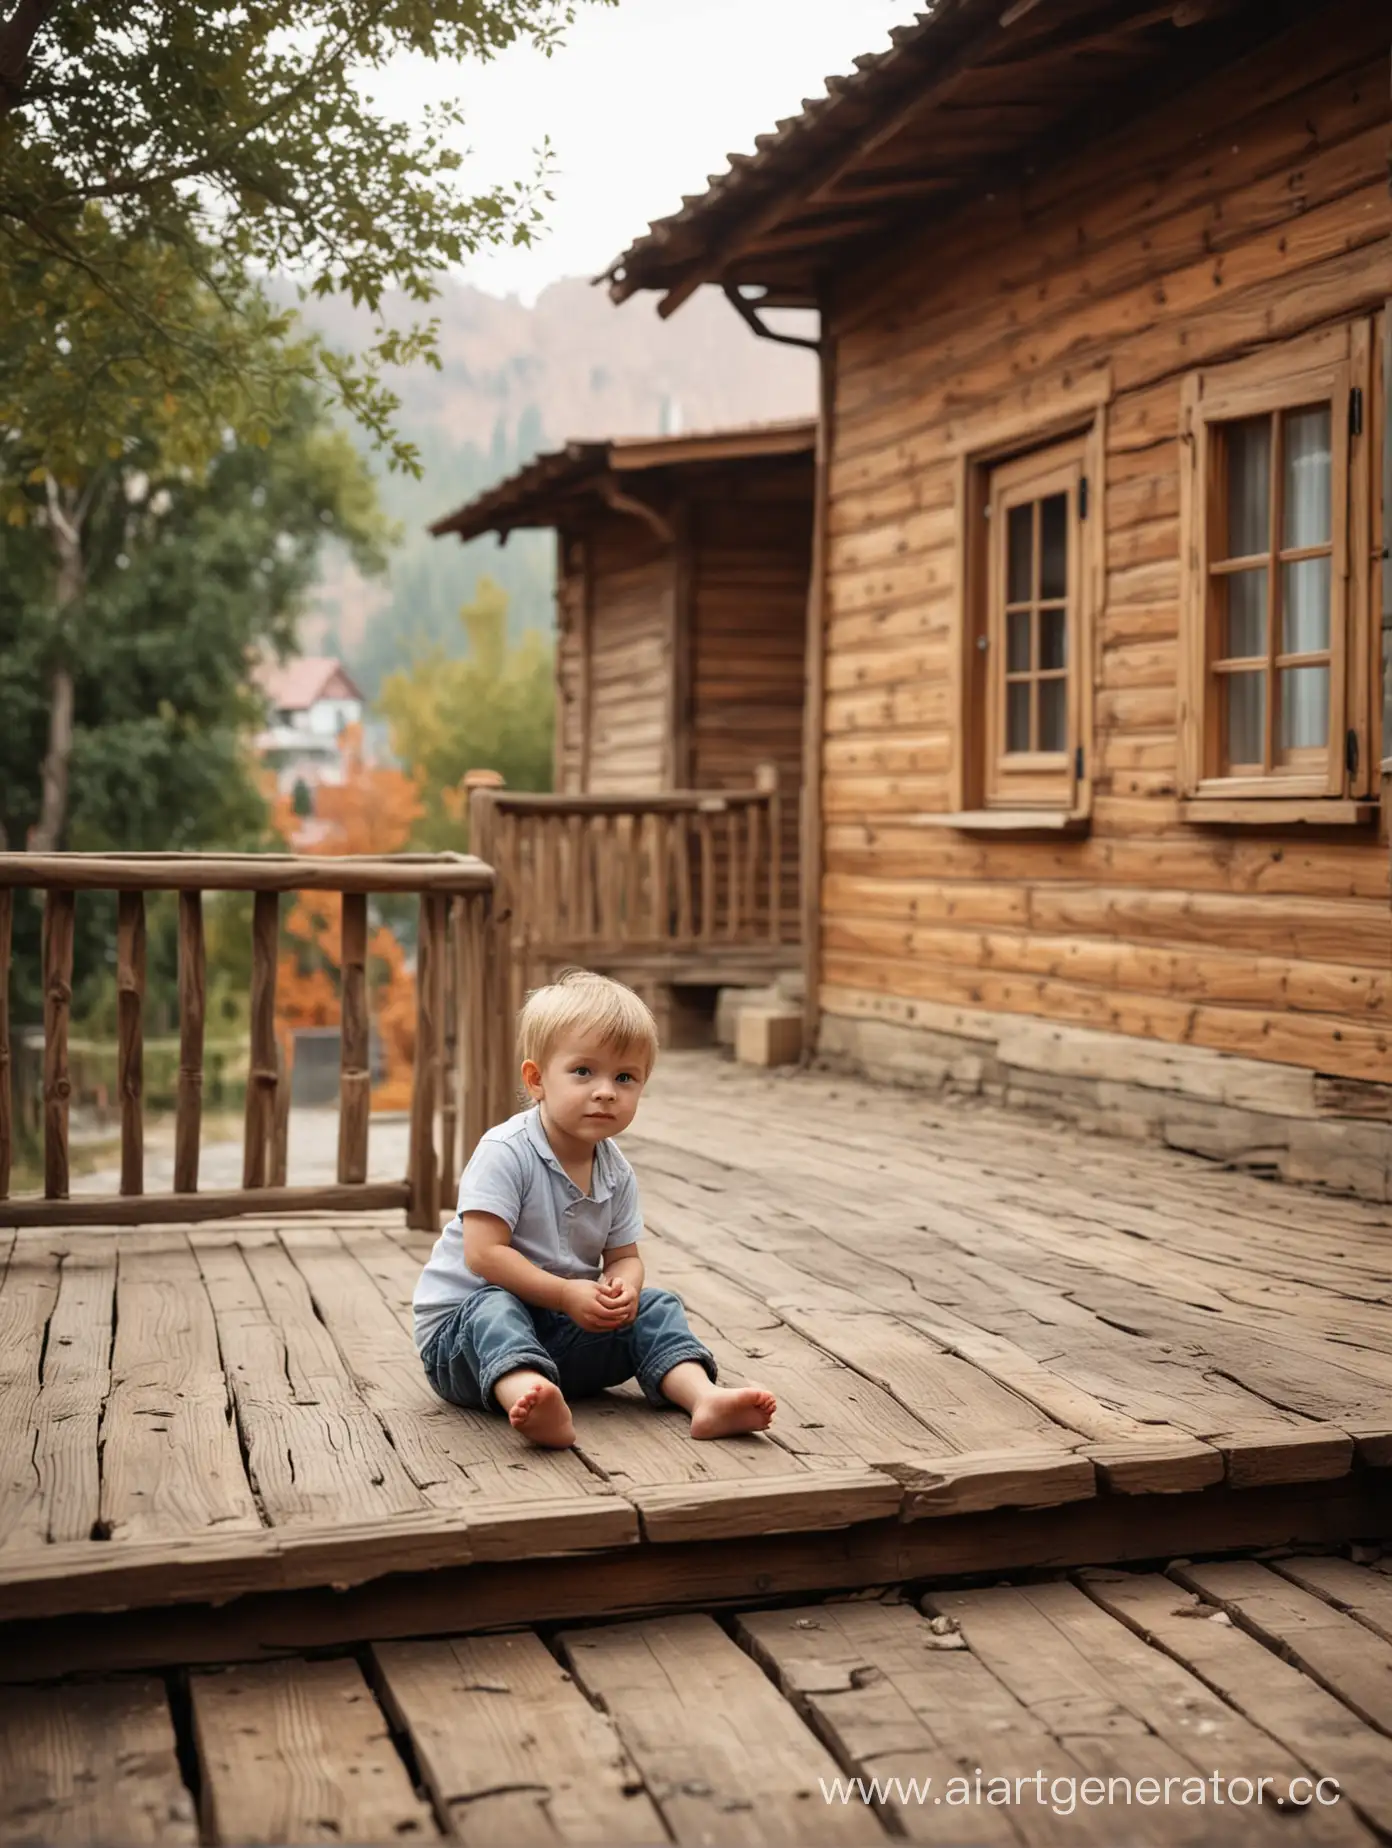 Child-Relaxing-on-Wooden-Terrace-with-Blurred-House-View